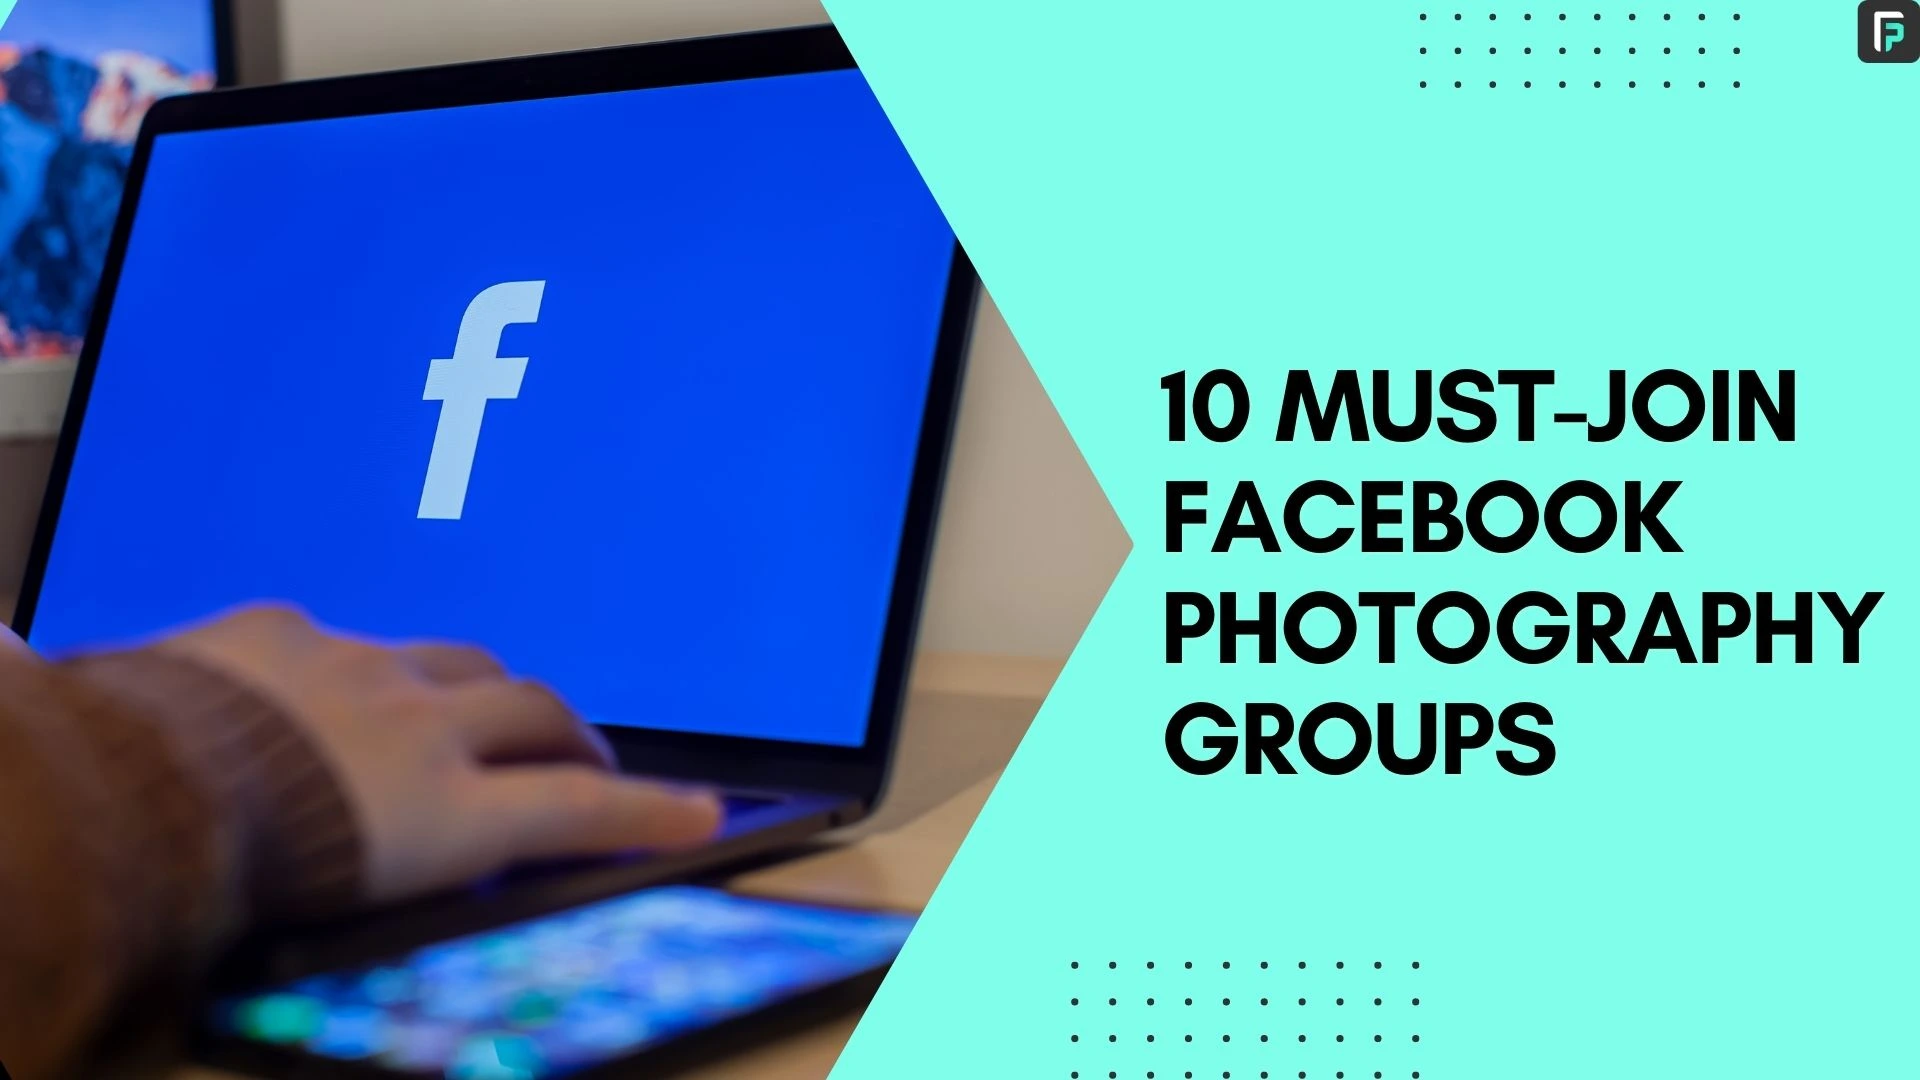 10 Must-Join Facebook Photography Groups